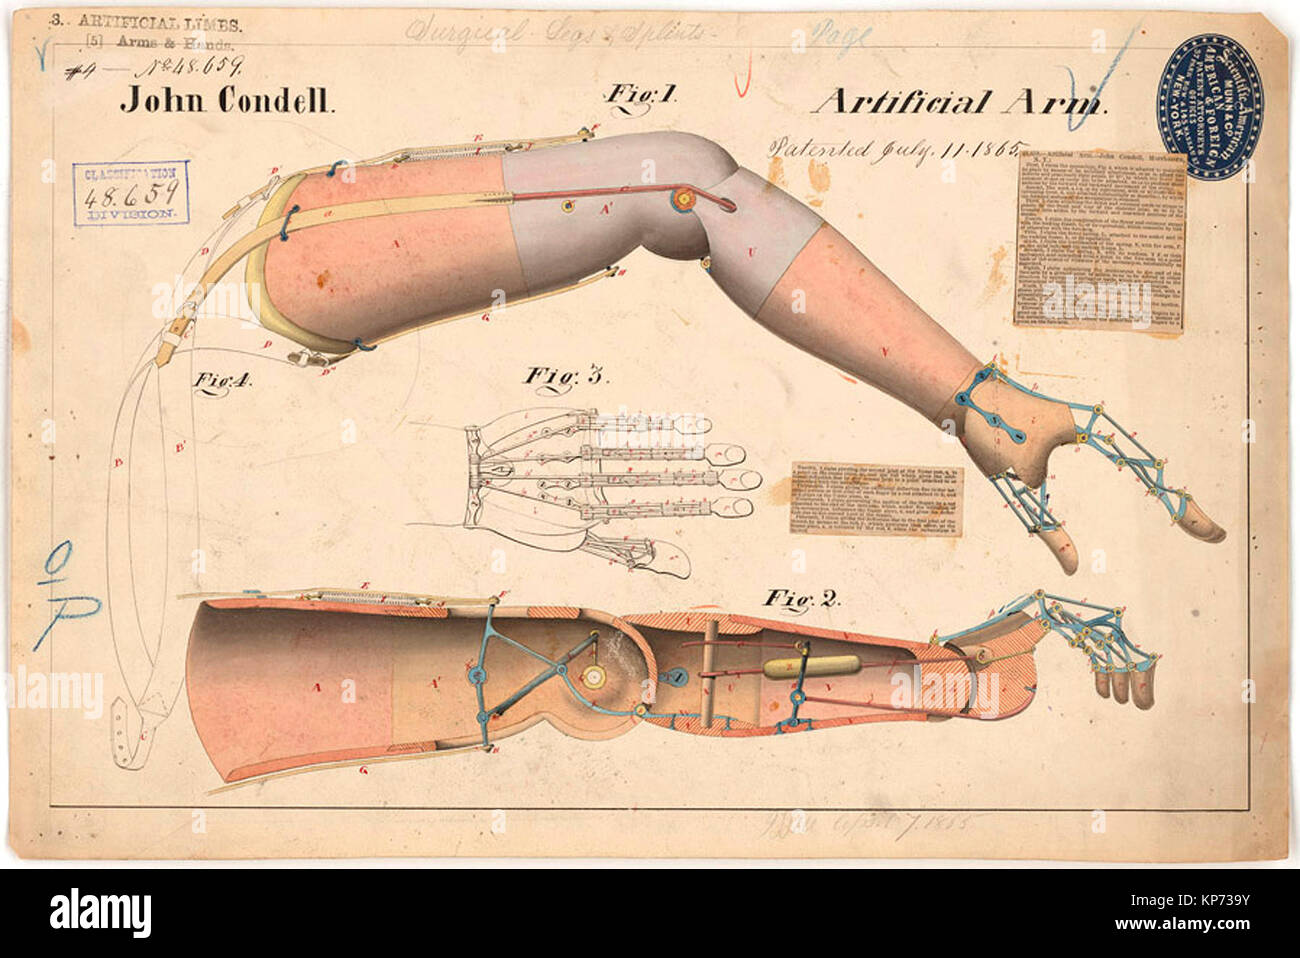 John Condell, Artificial Arm Patented July 11, 1865 Stock Photo